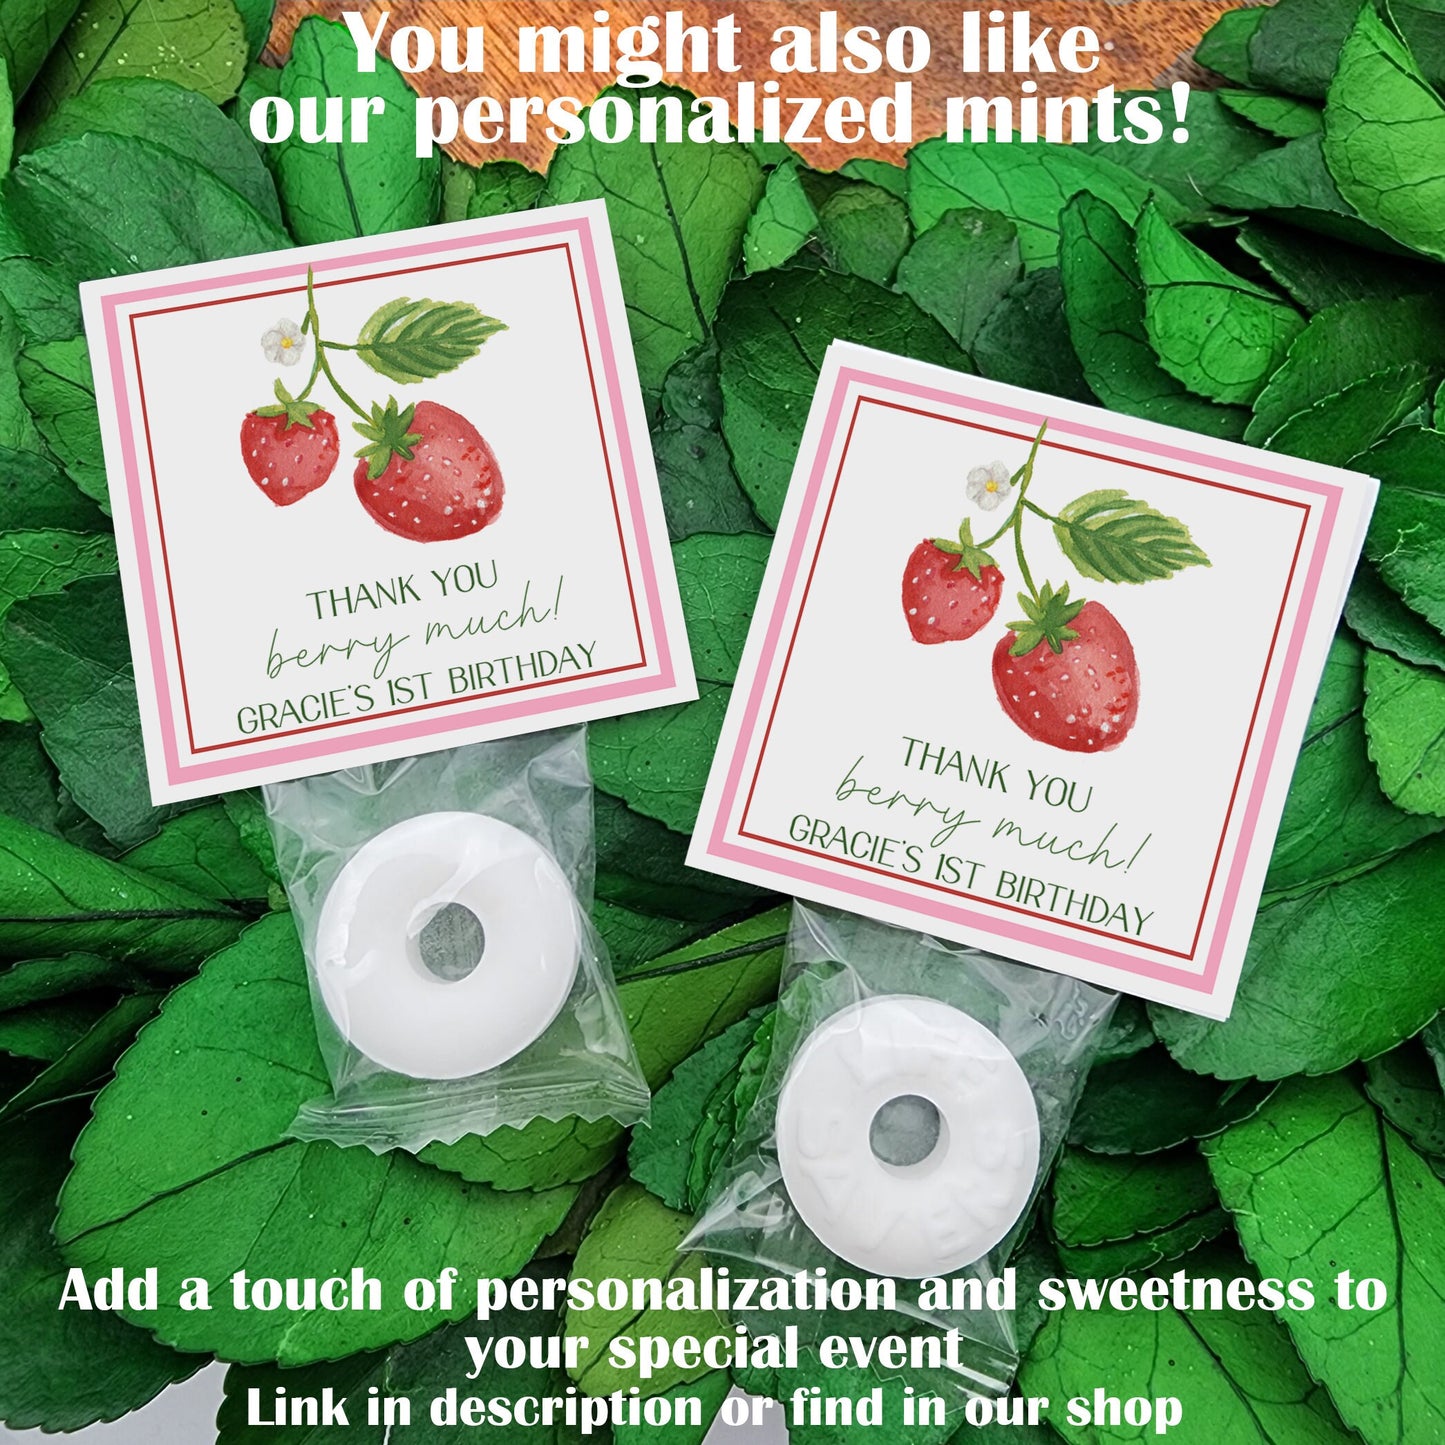 Berry first birthday favors - Strawberry baby shower favors - Berry 1st birthday favors - Two sweet birthday - strawberry shortcake party